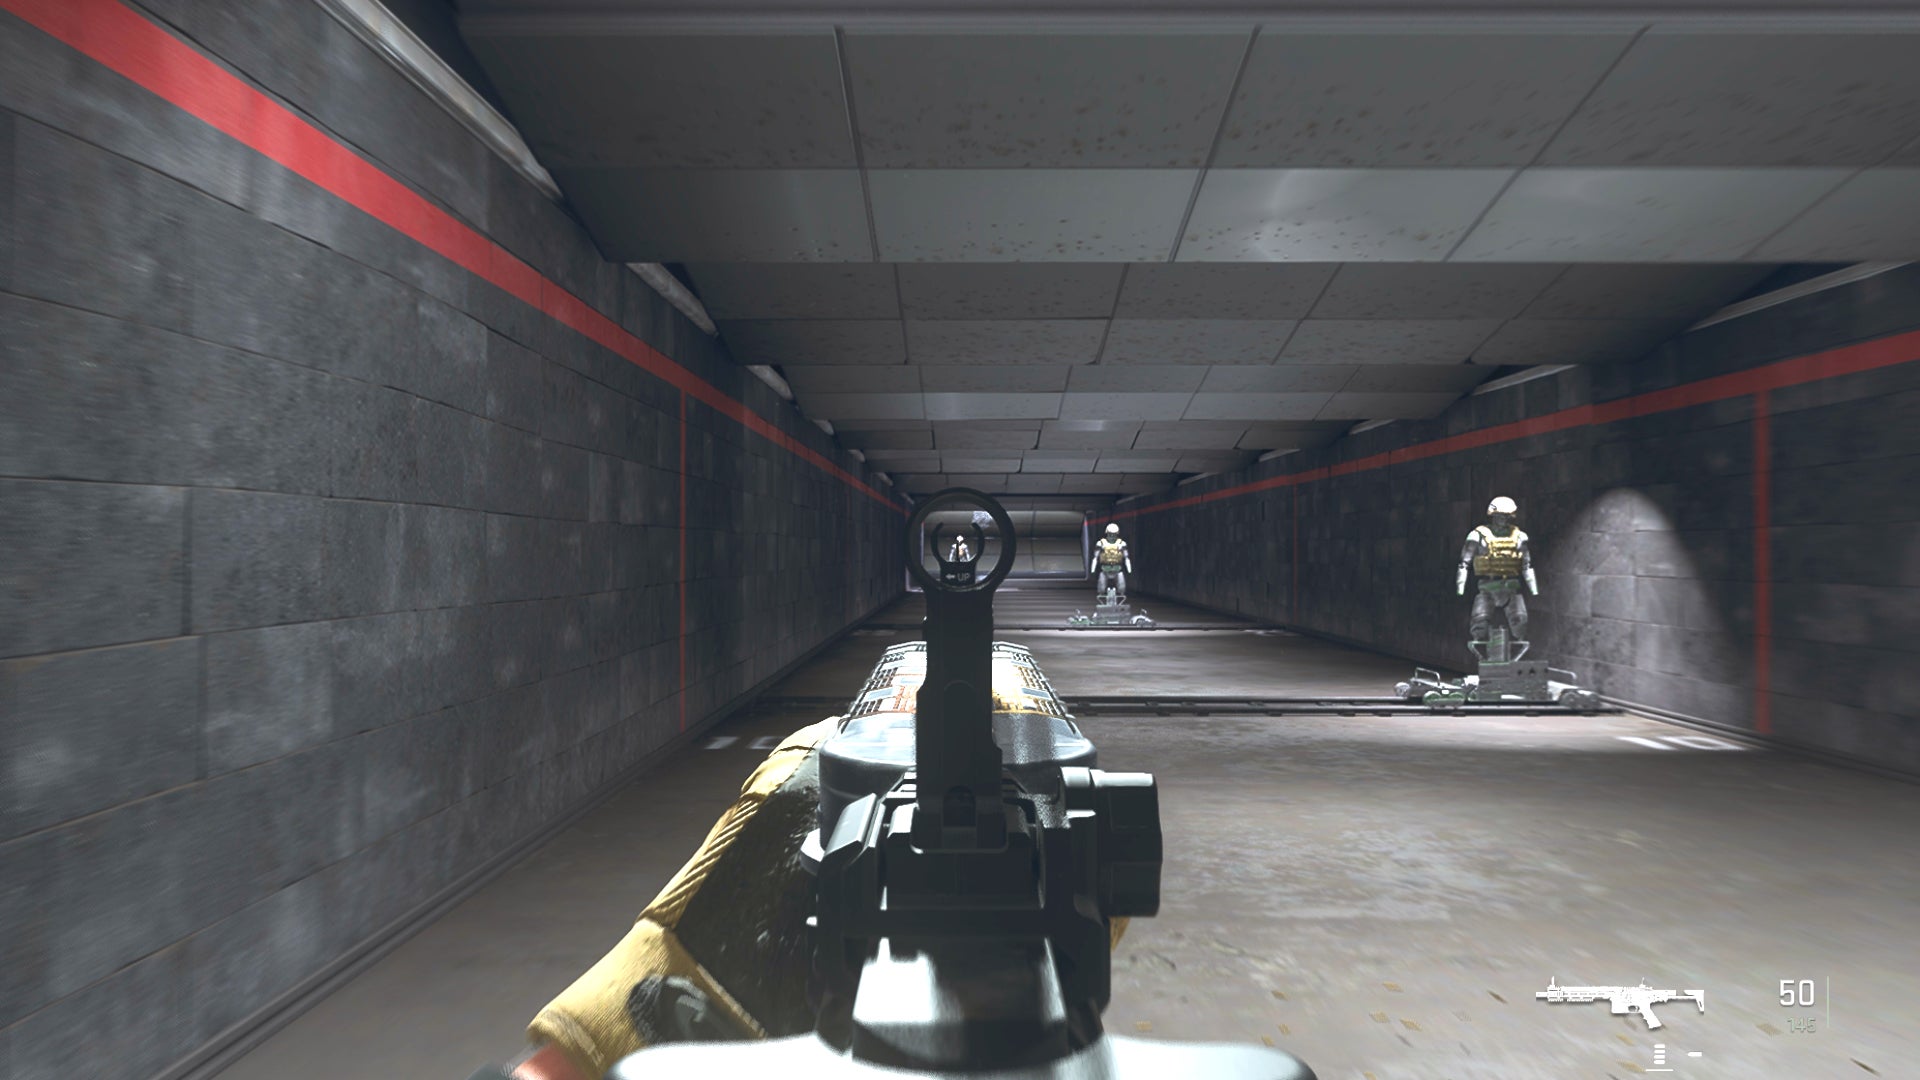 The player in Warzone 2.0 aims at a training dummy with the FSS Hurricane ironsights.